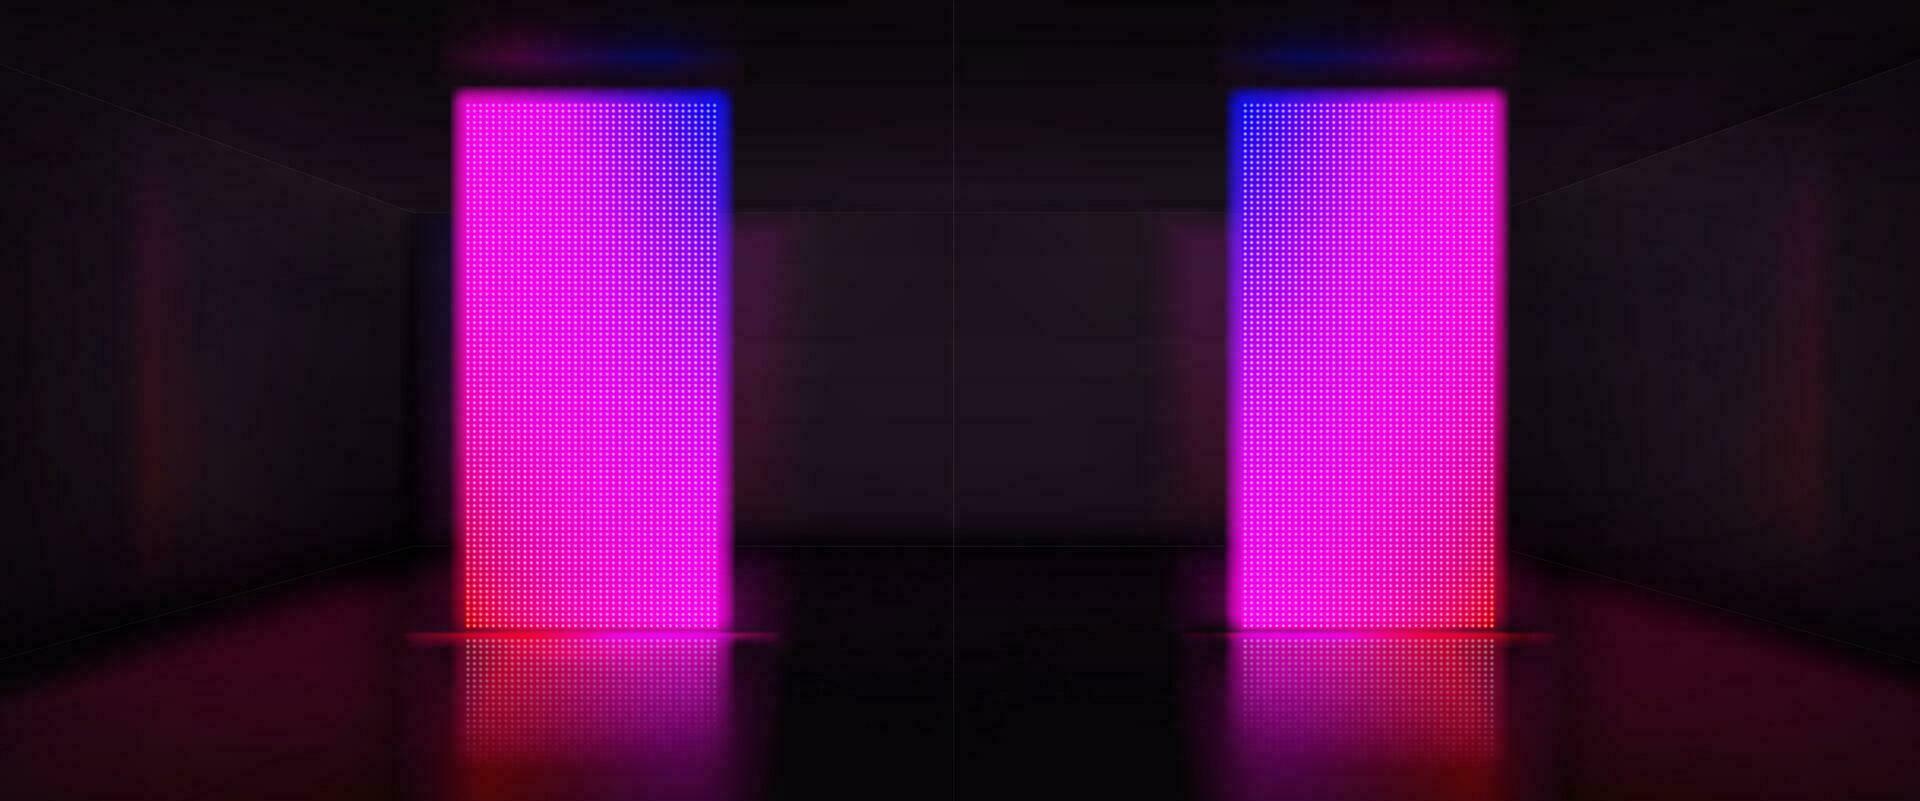 Neon room with led light stage vector background